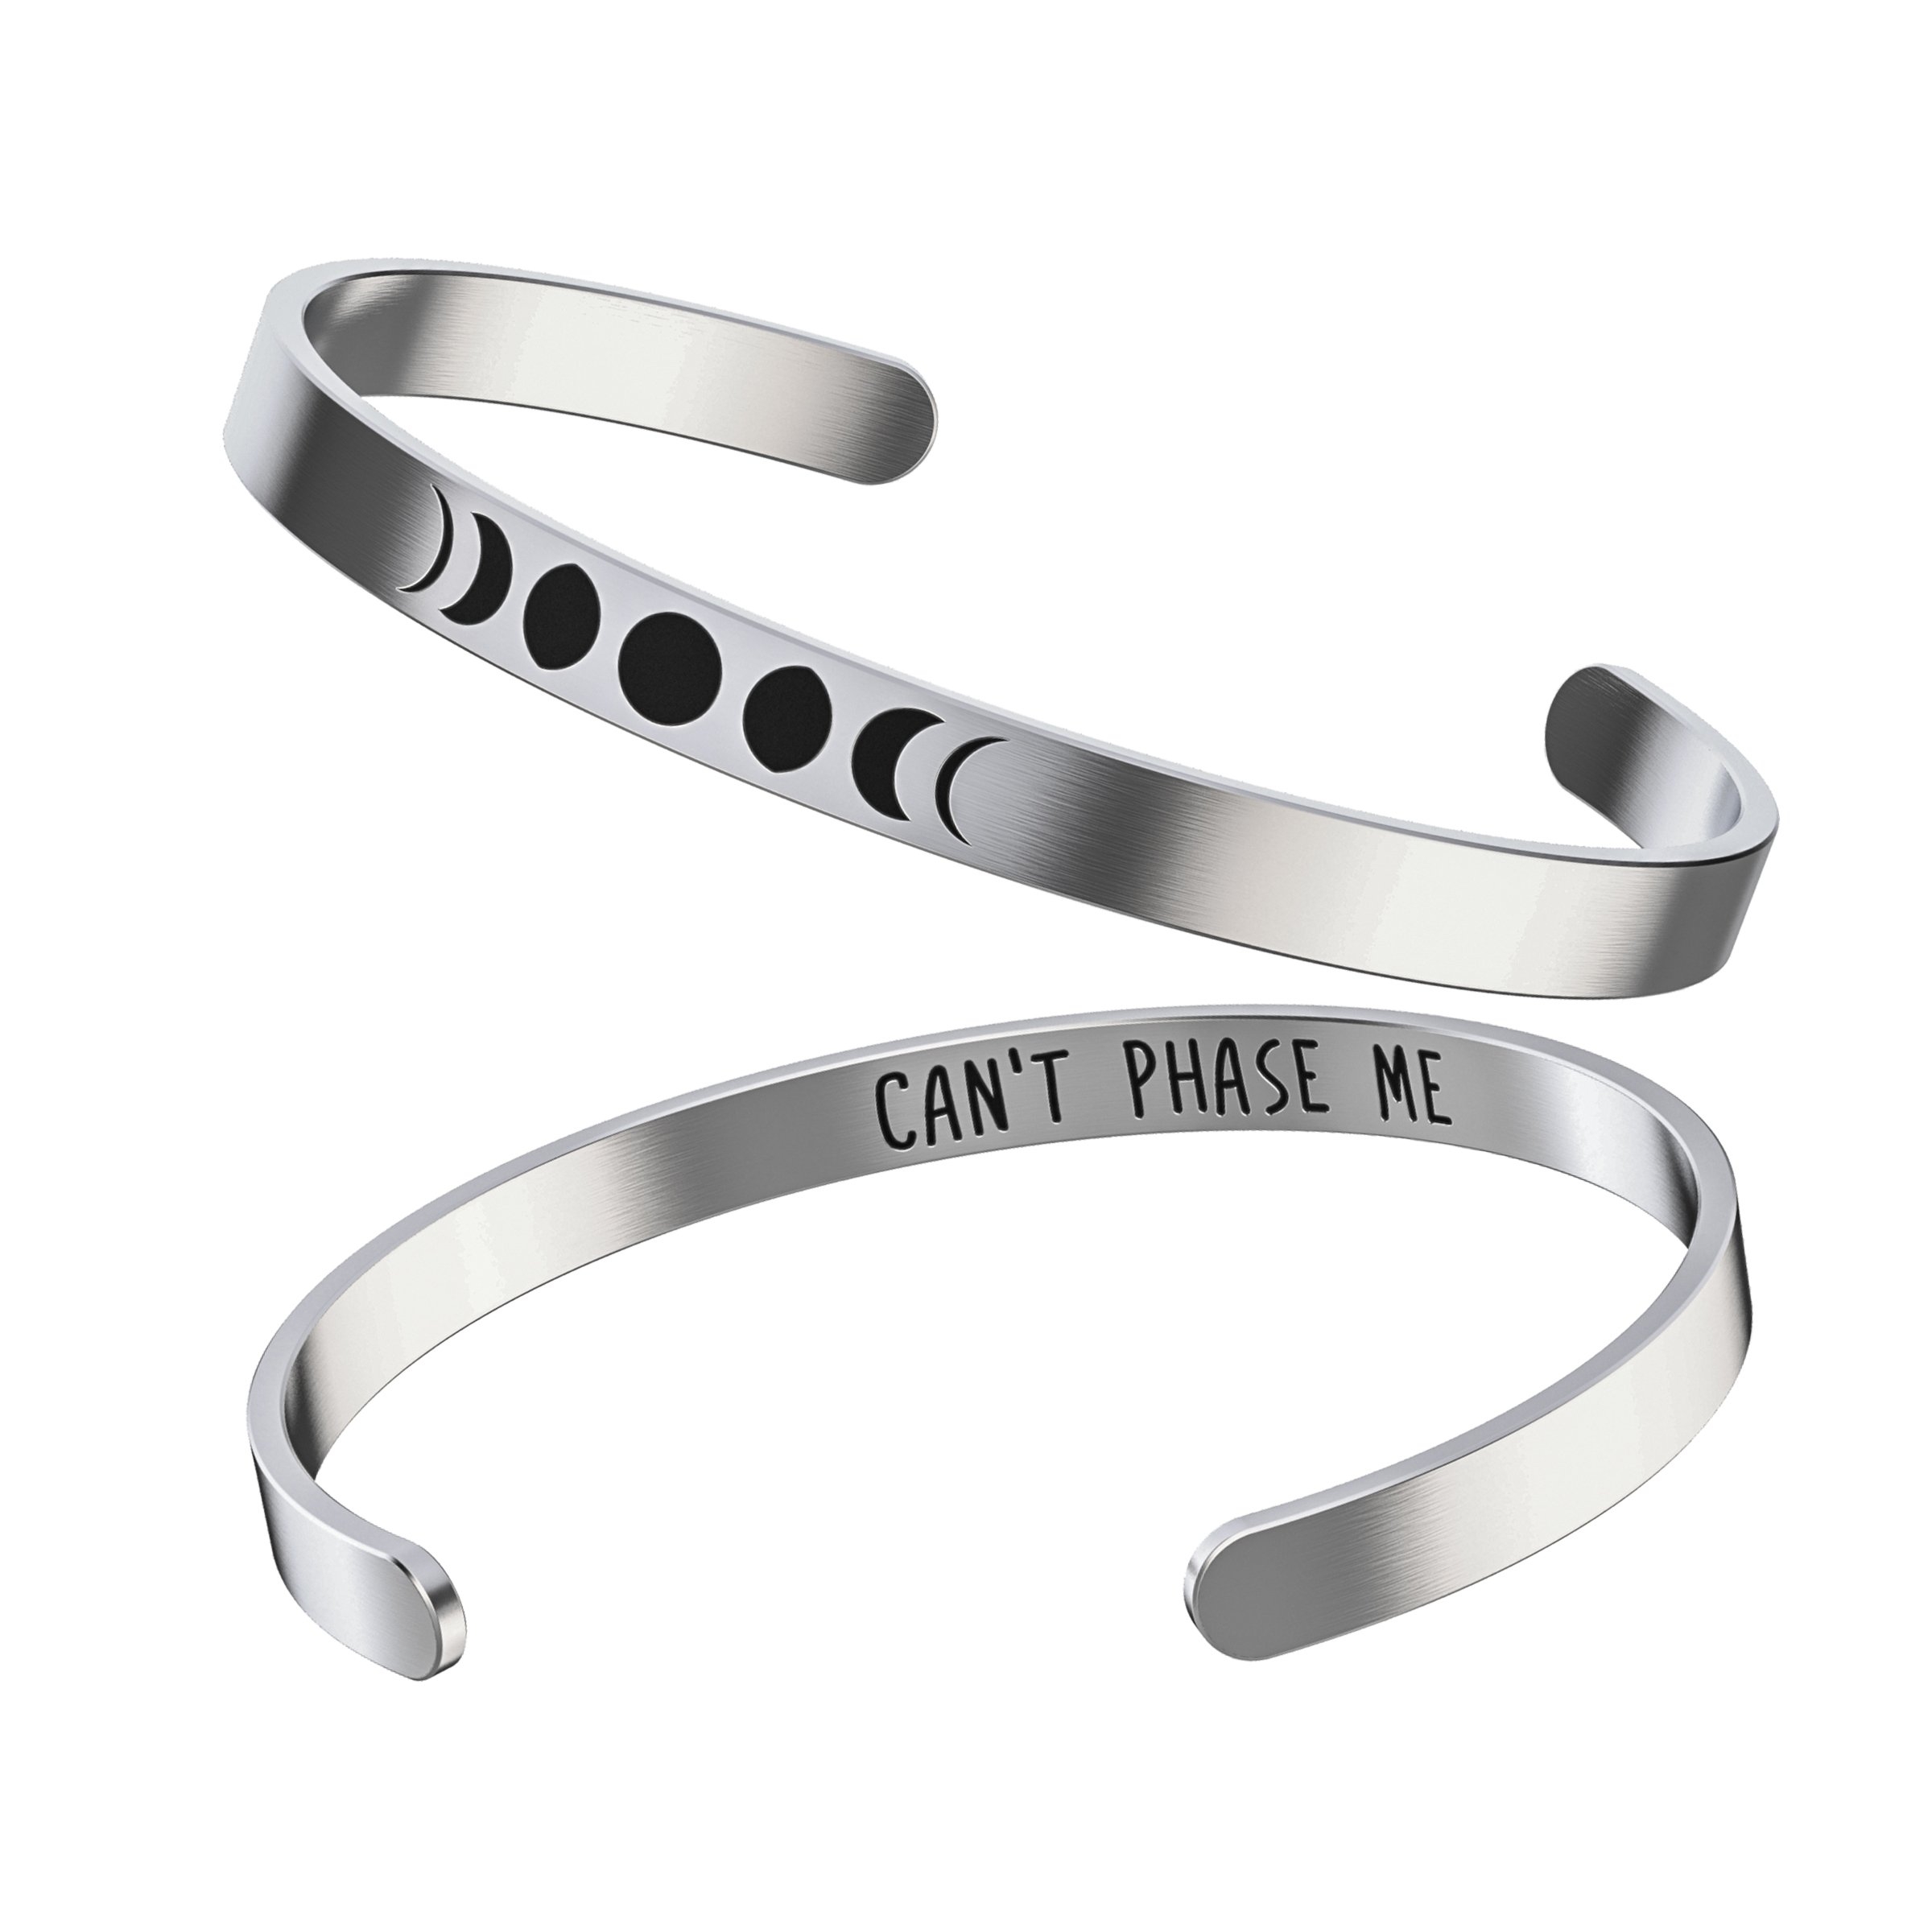 Moon Phases Bracelet – Moon Gifts For Women – Cute Stainless Steel Bangle – Silver Cuff With “Can’t Phase Me” Inspirational Quote – Happy Kisses